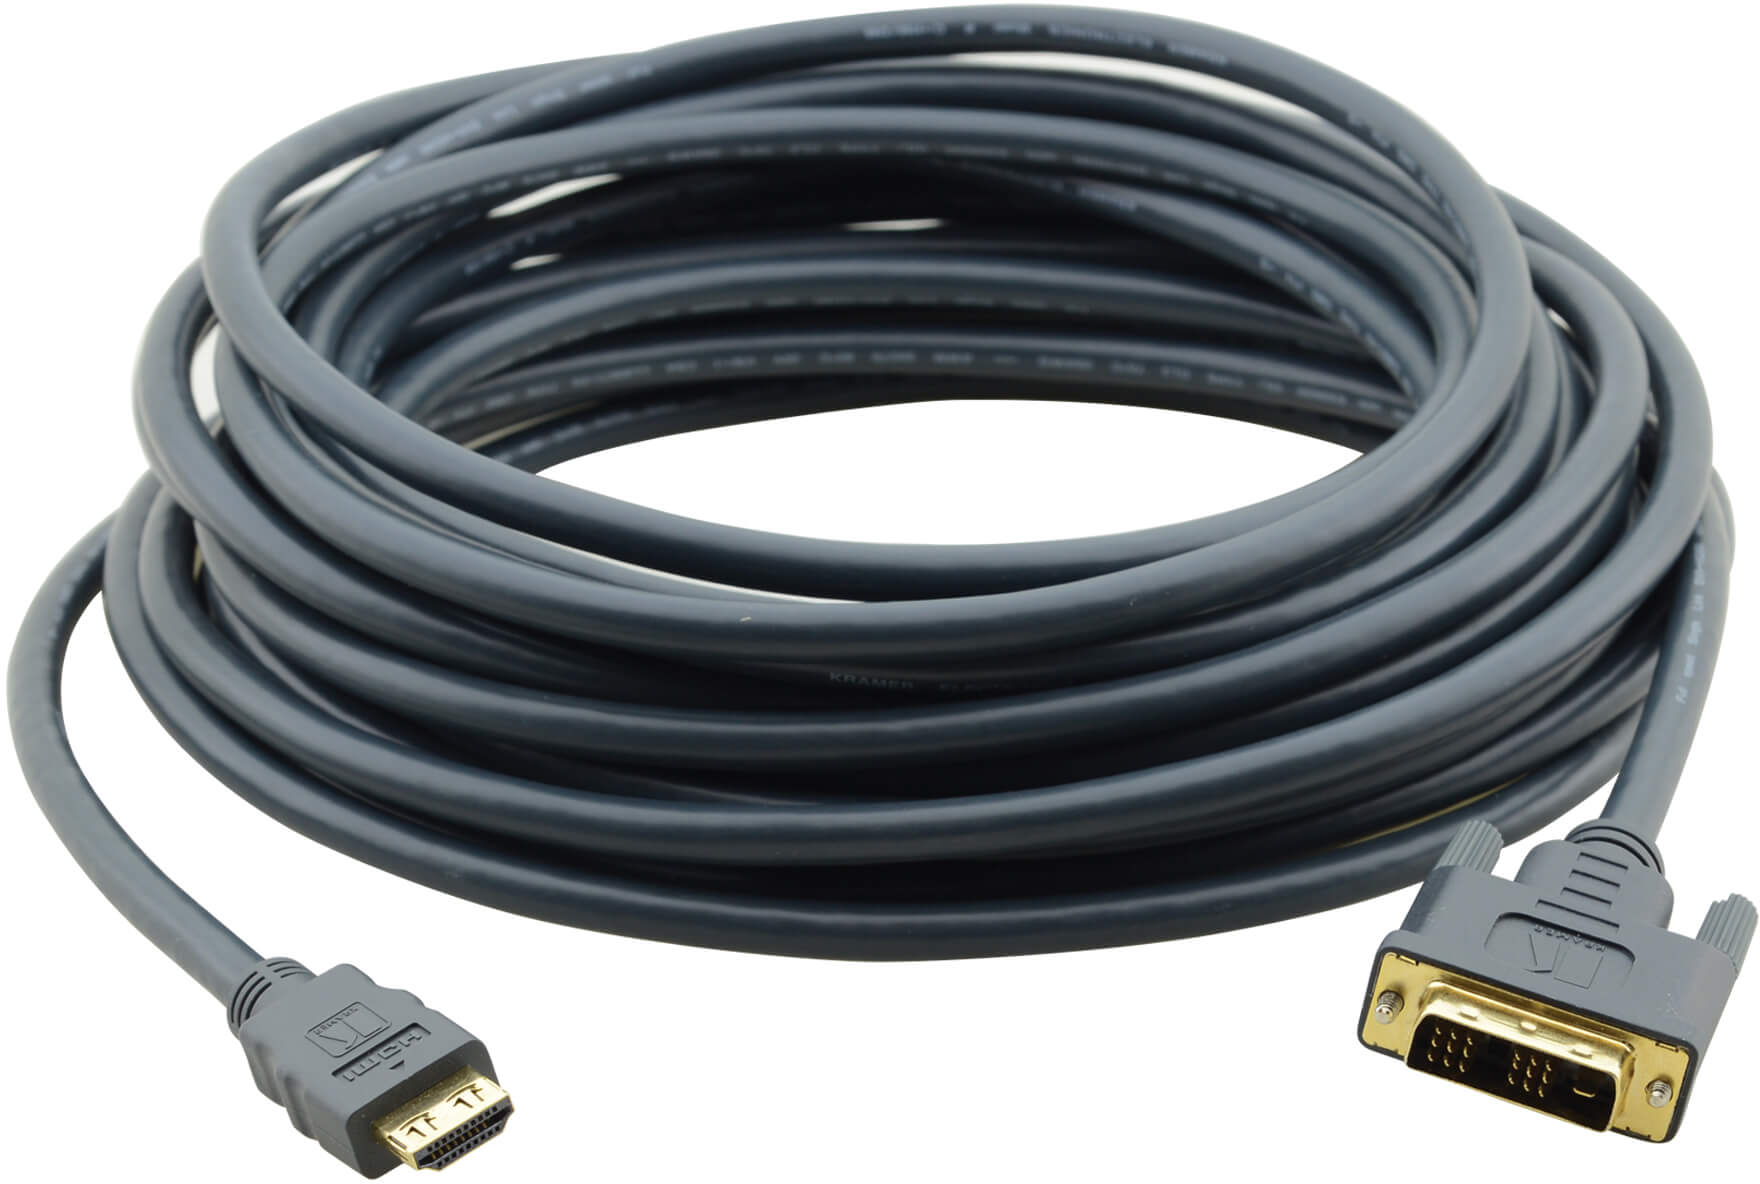 You Recently Viewed Kramer HDMI (M) to DVI (M) Cable Image